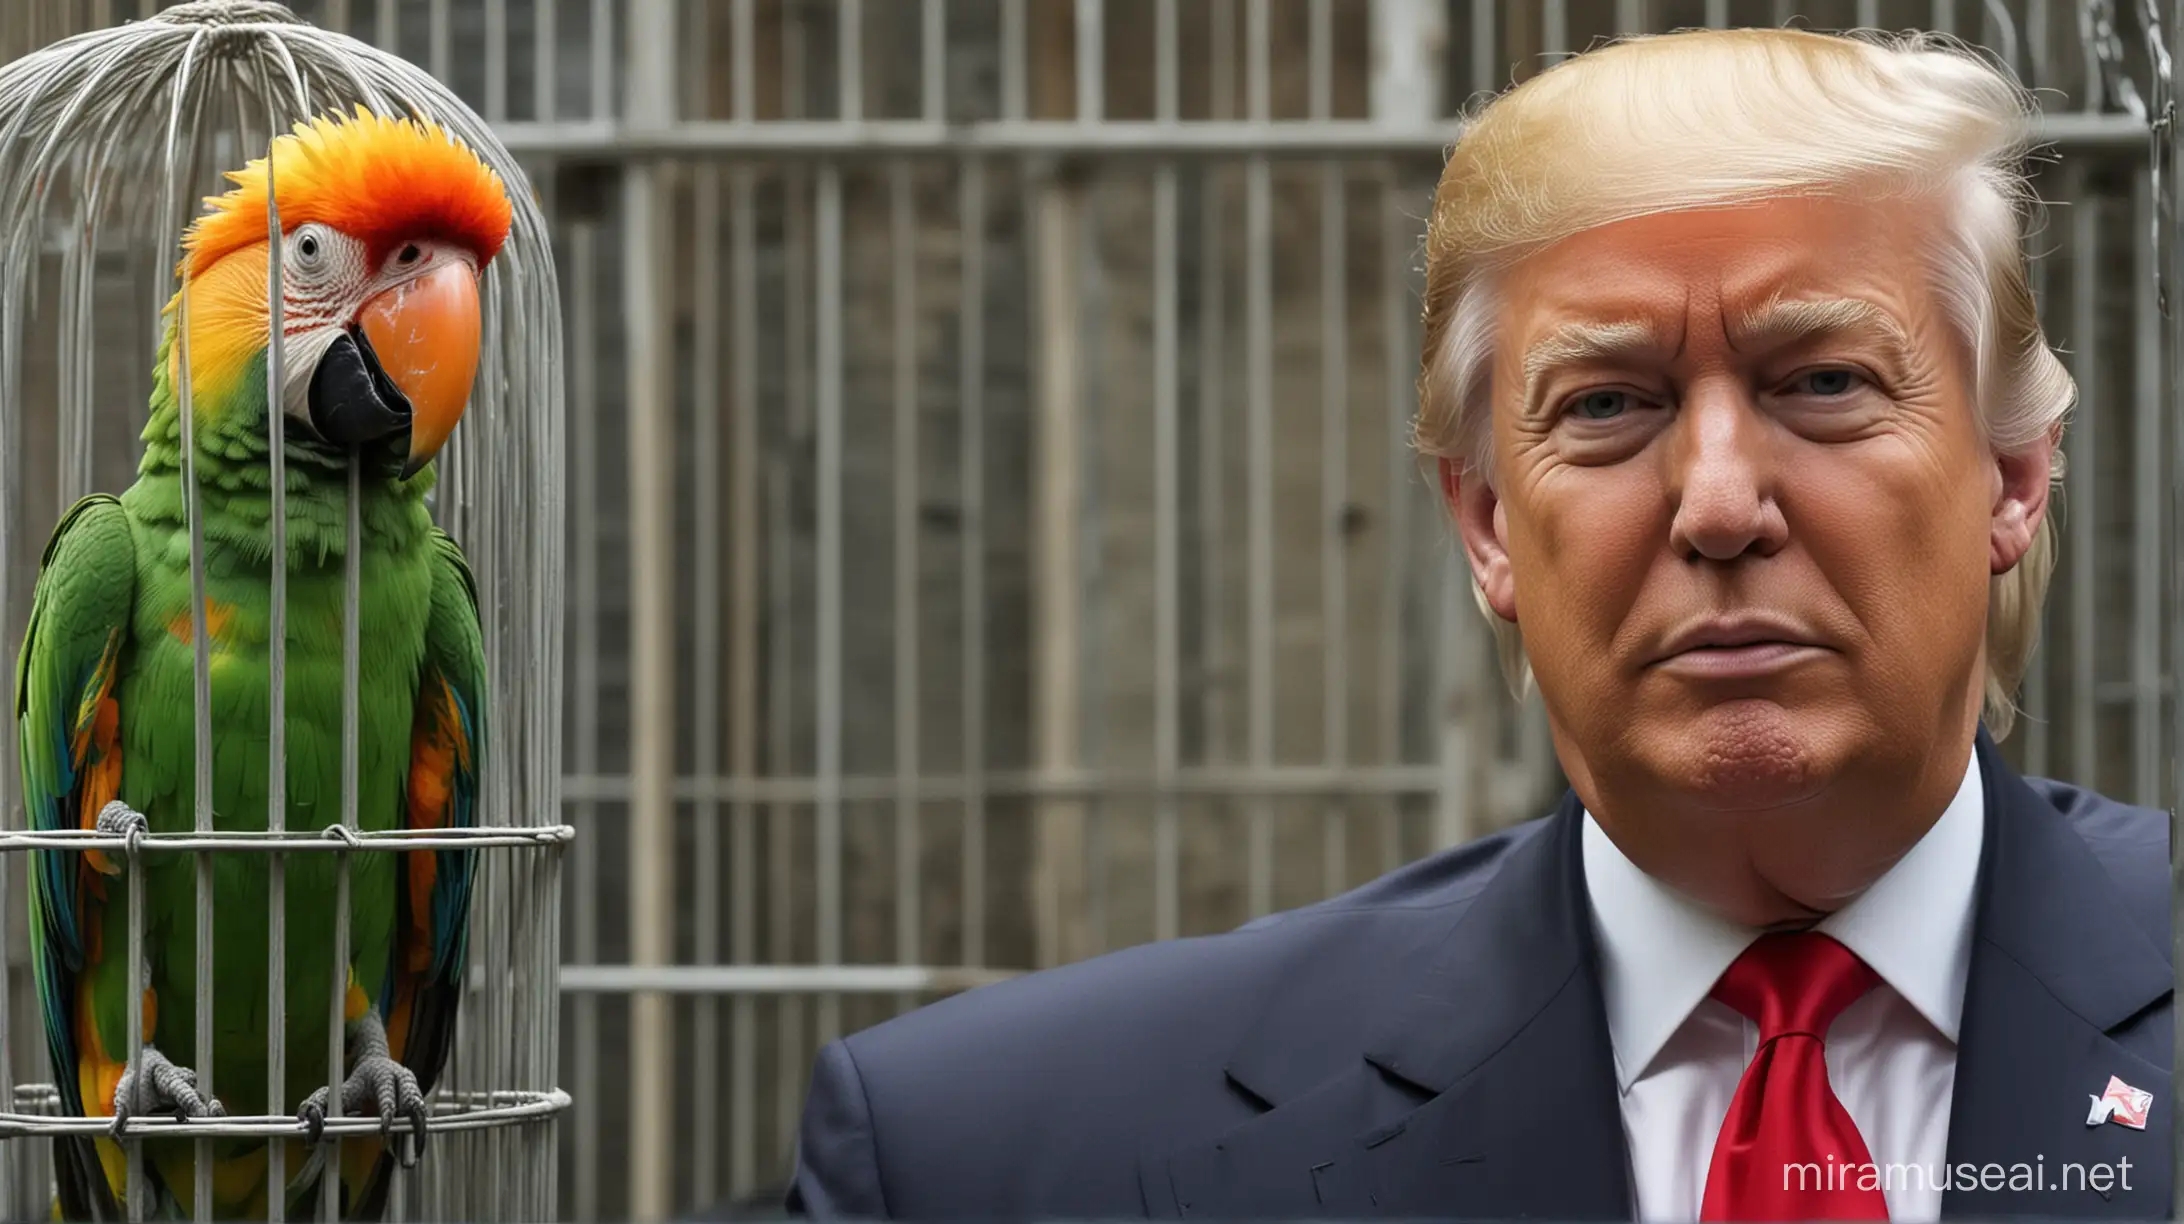 Donald Trump and His Caged Parrot Interaction